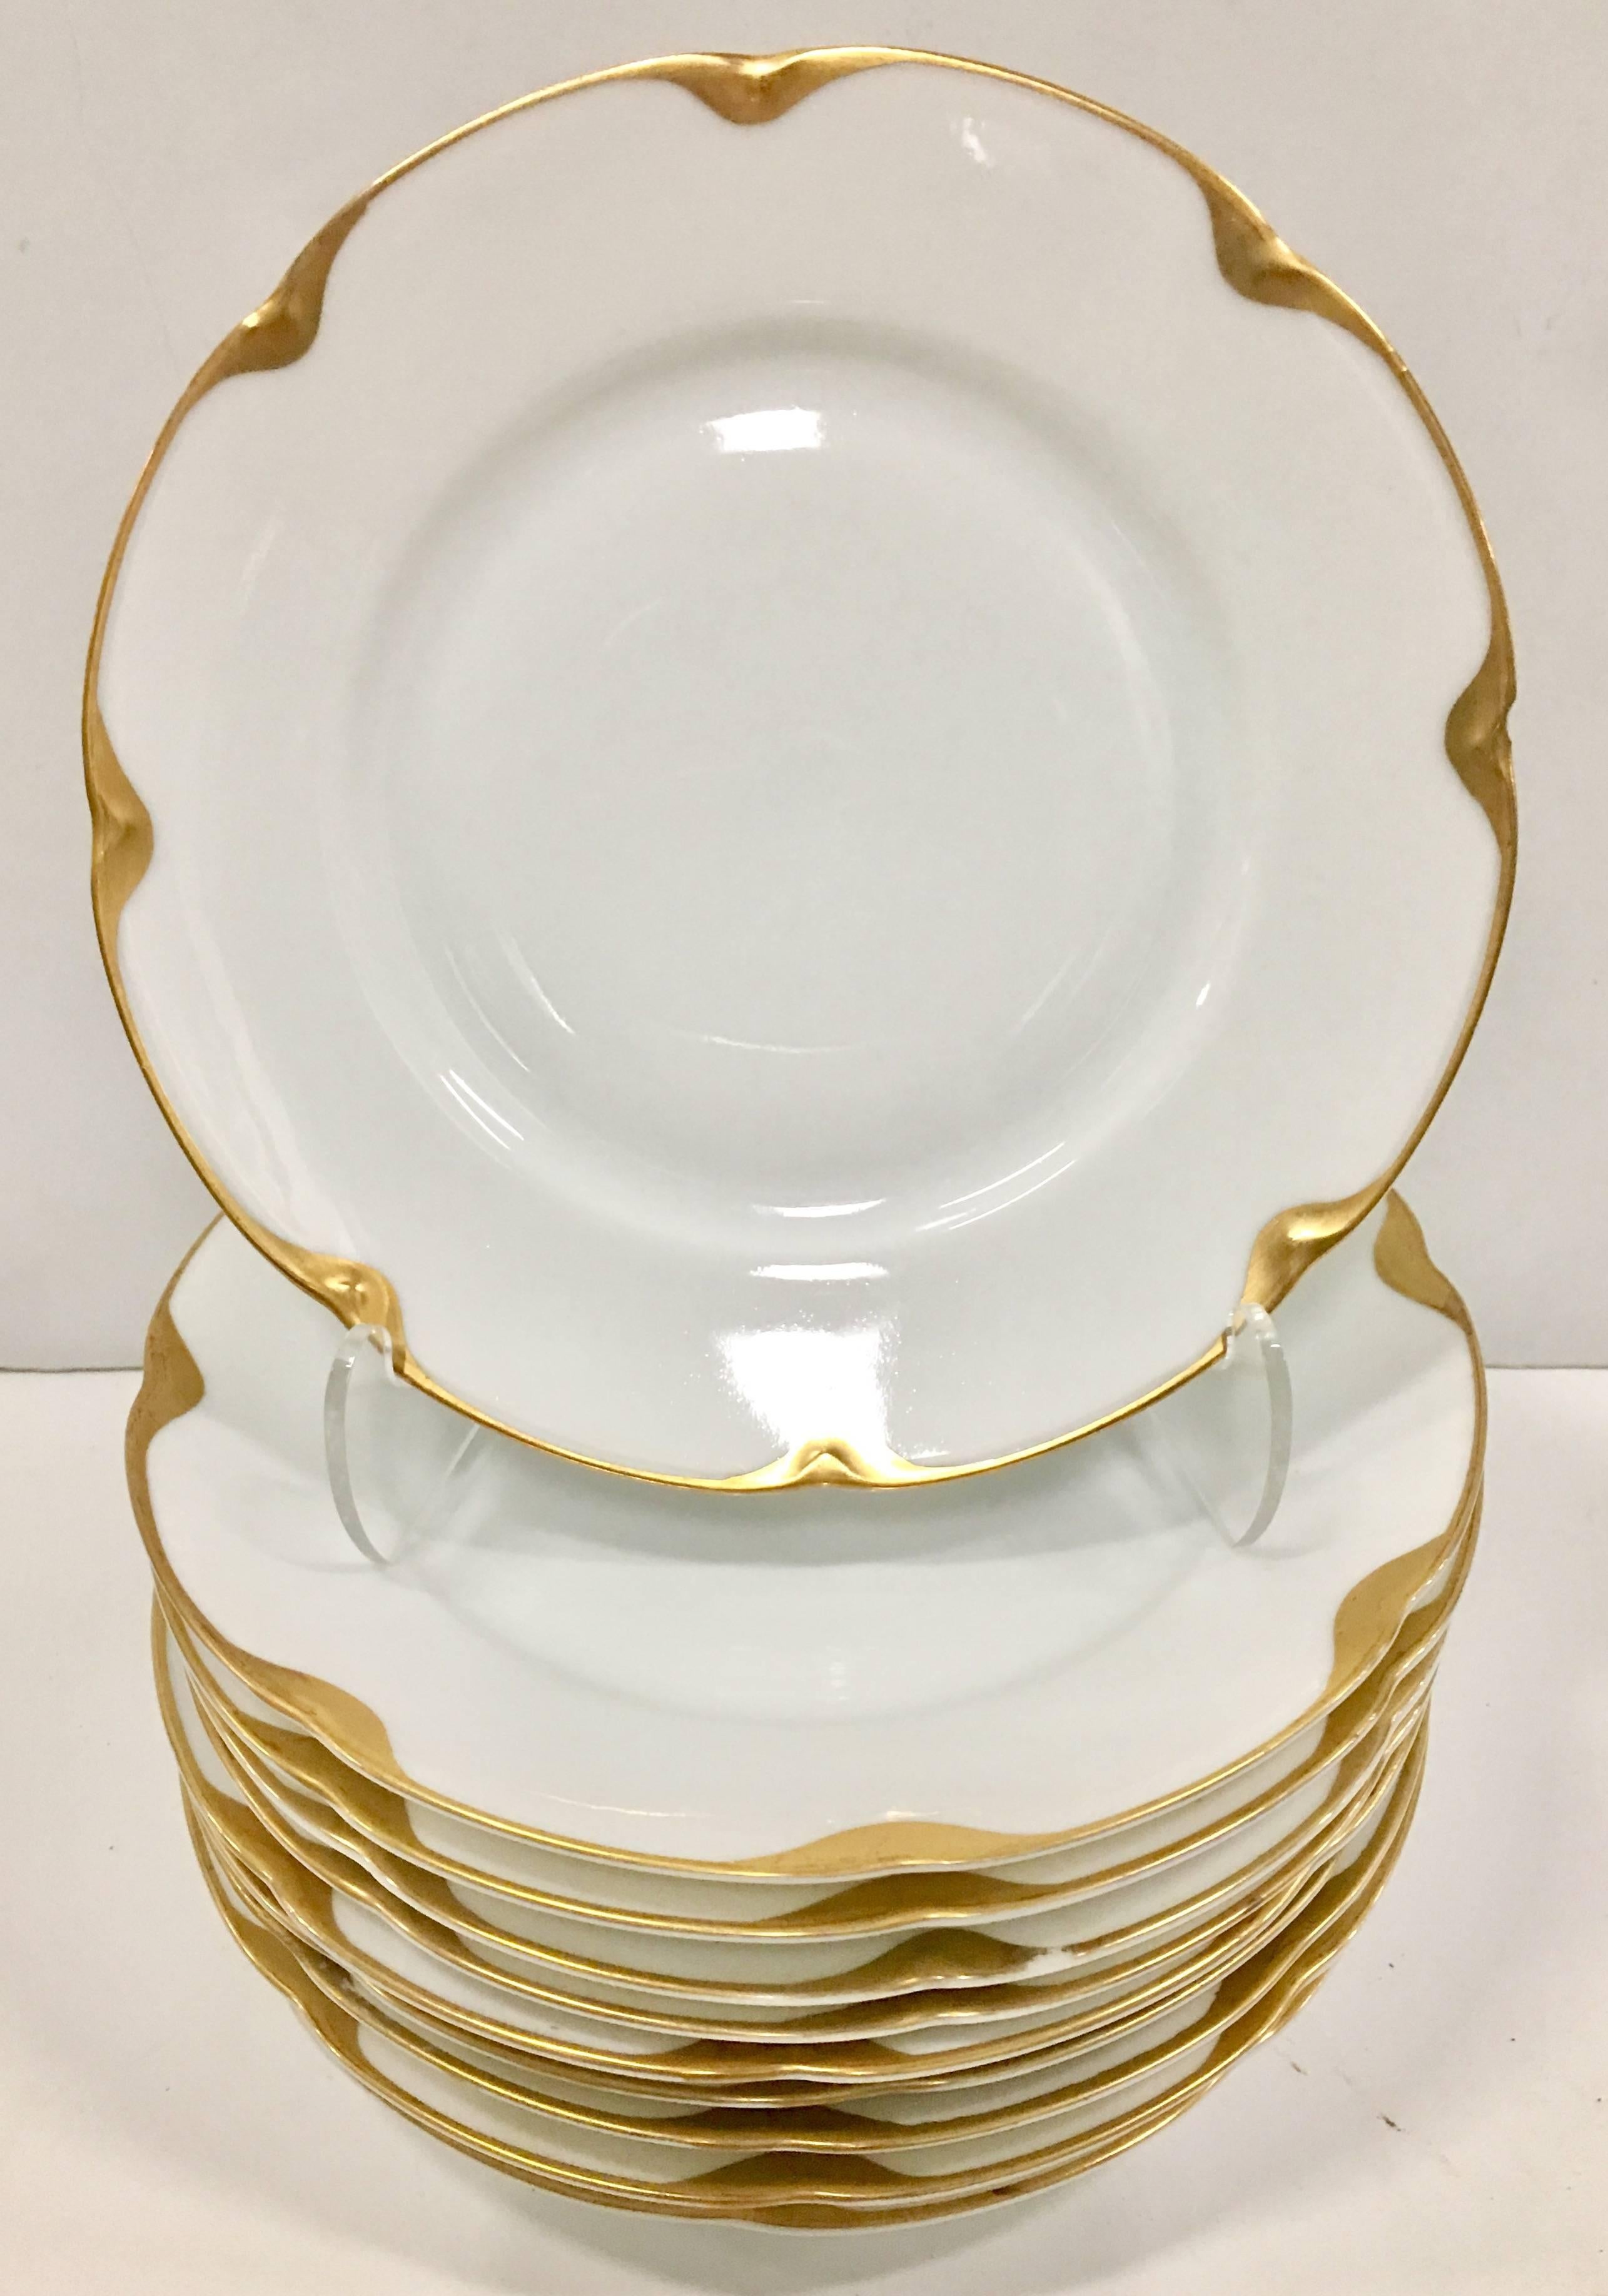 Rare Royal Epiag bright white porcelain with 18-karat gold hand-painted scallop edge detail dinnerware set of 23 pieces in "Veragold". Veragold is identical and almost impossible to discern from the same pattern by a different name made by